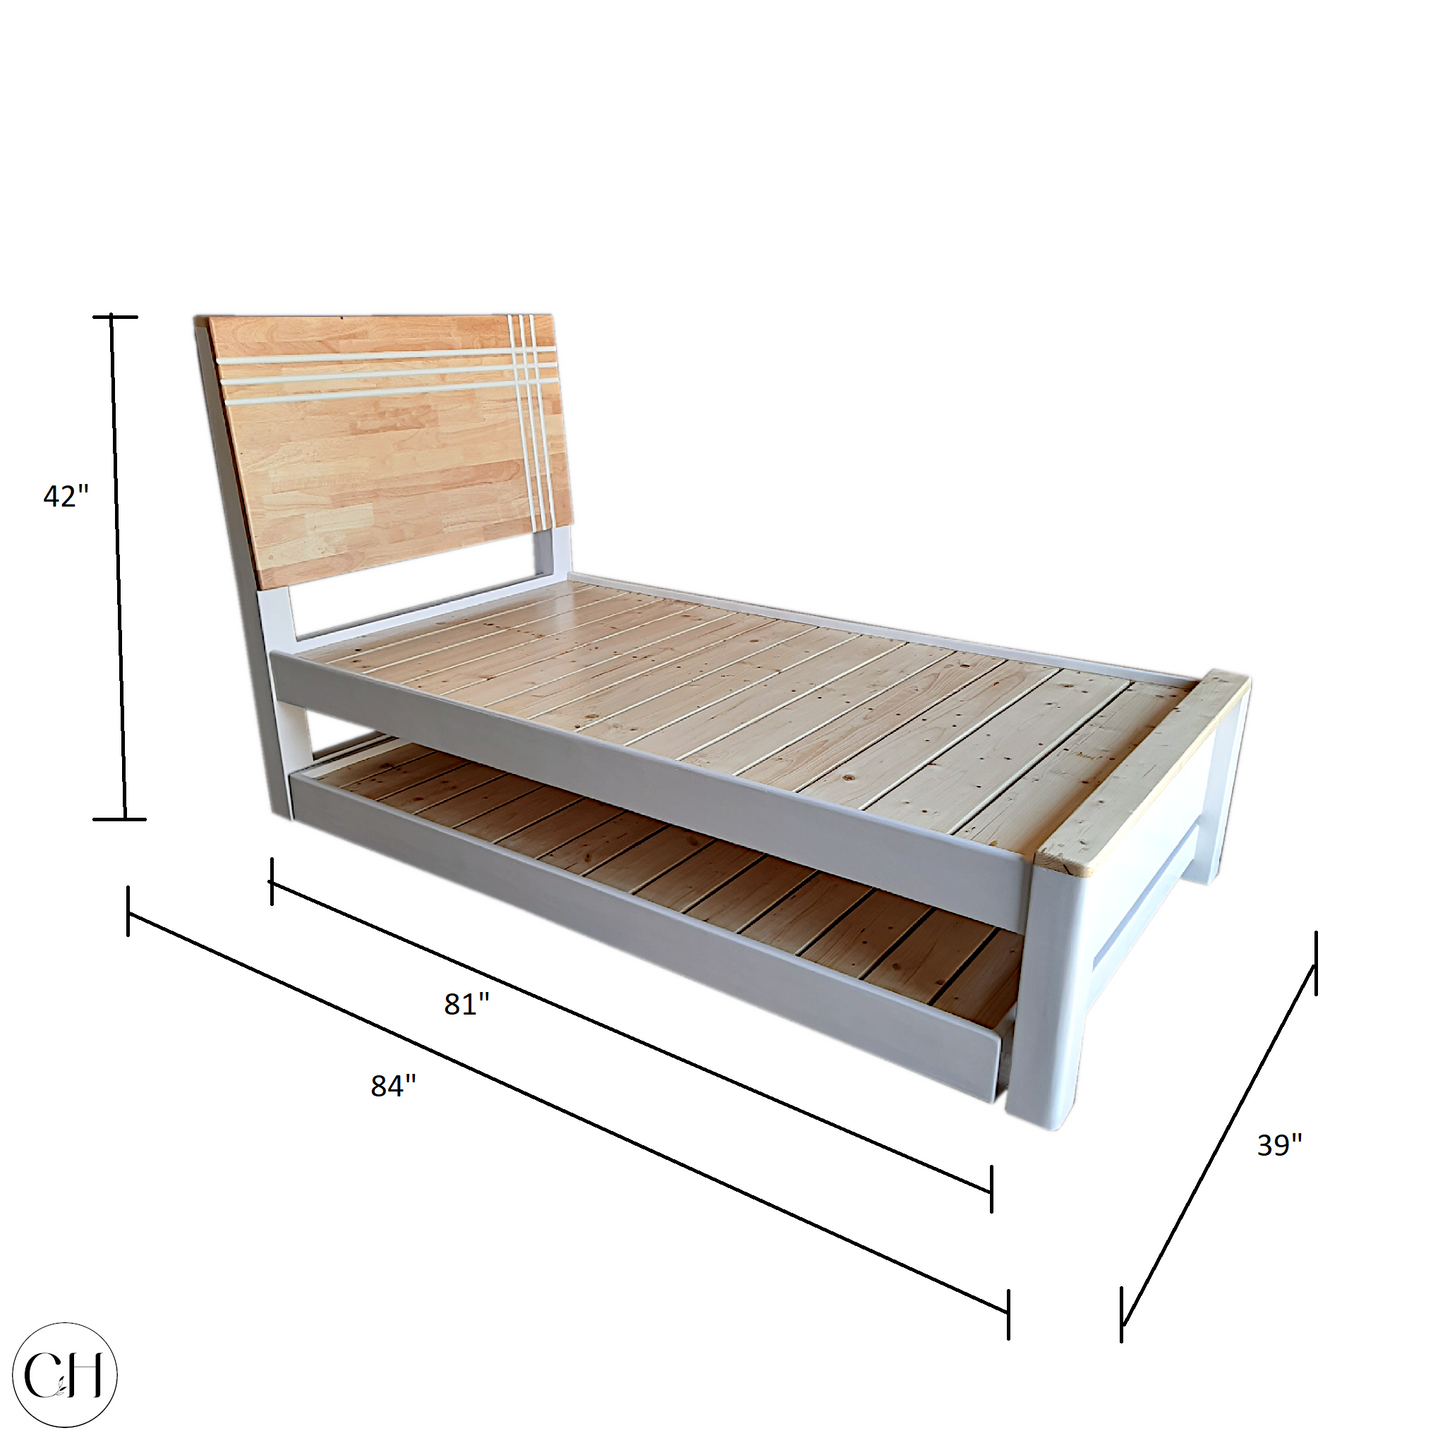 CustHum Stardust - solid wood bed with trundle in natural pine and white finish and headboard with inlaid paintwork (dimensions, single size)